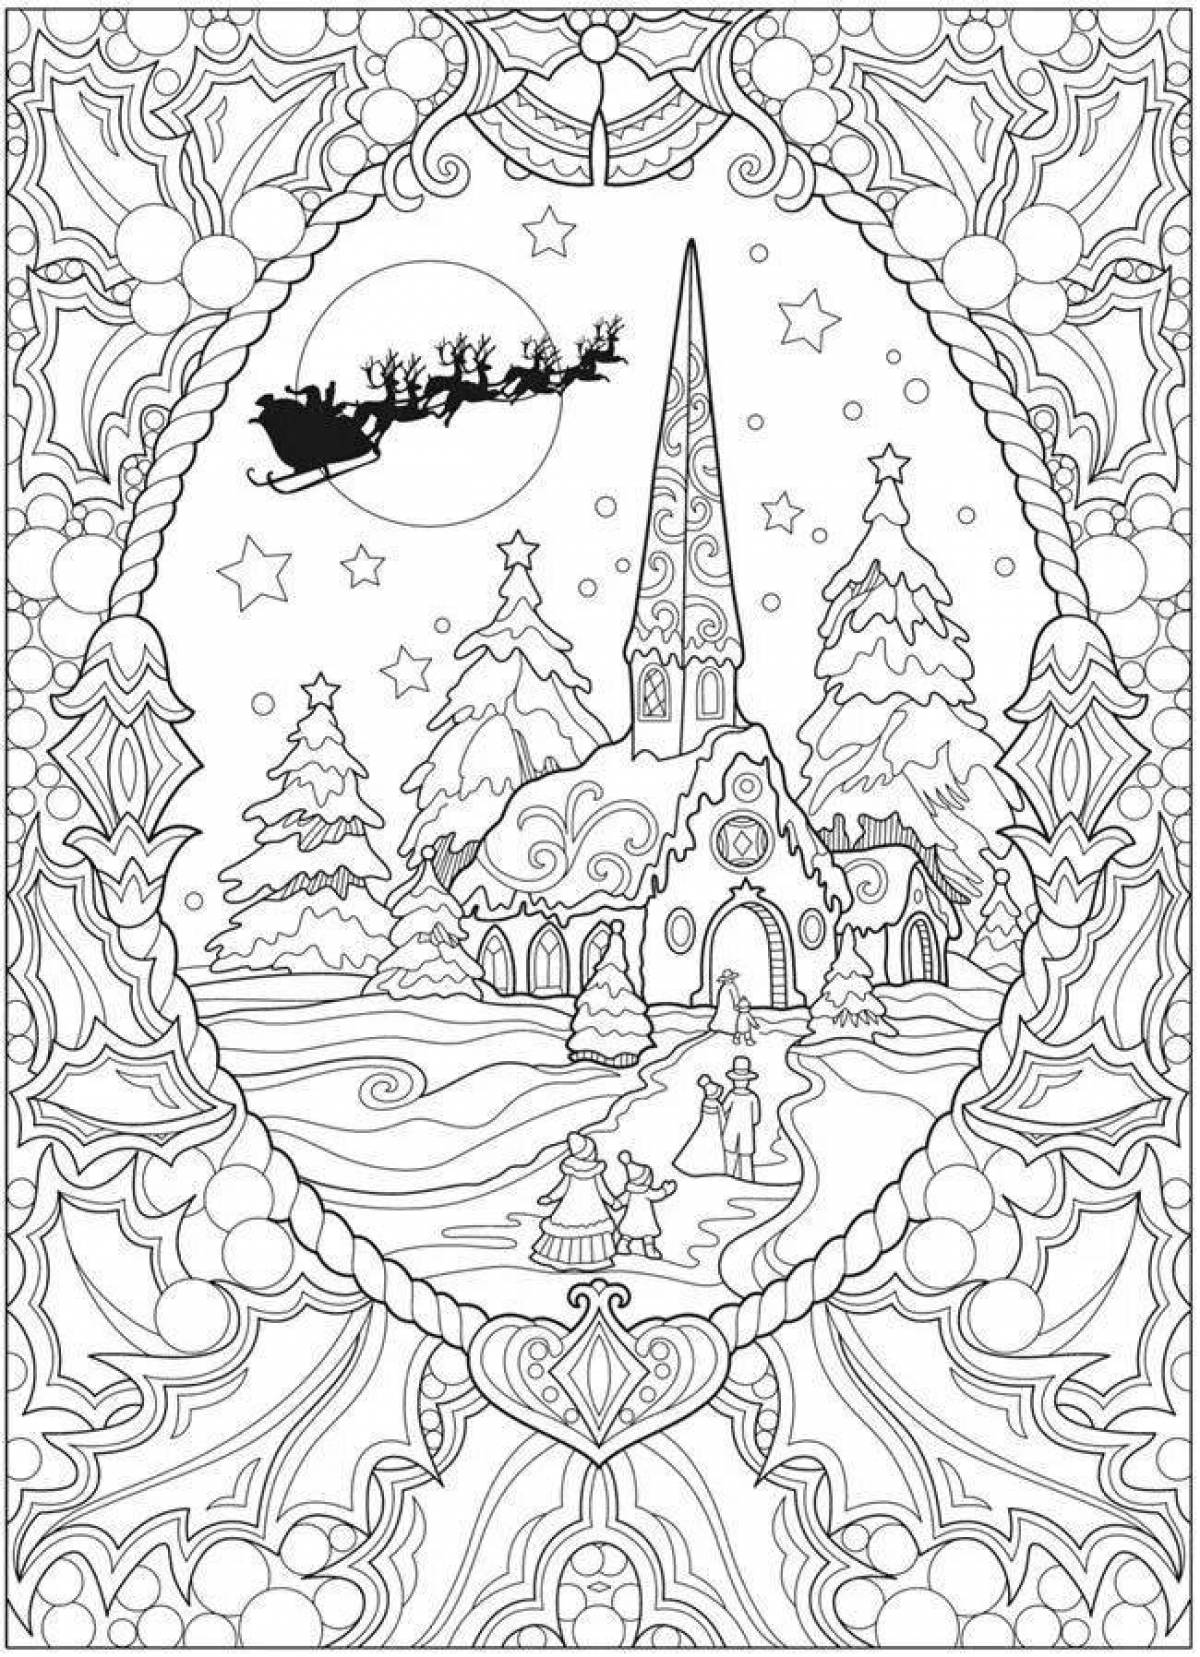 Exquisite Christmas wonders coloring book